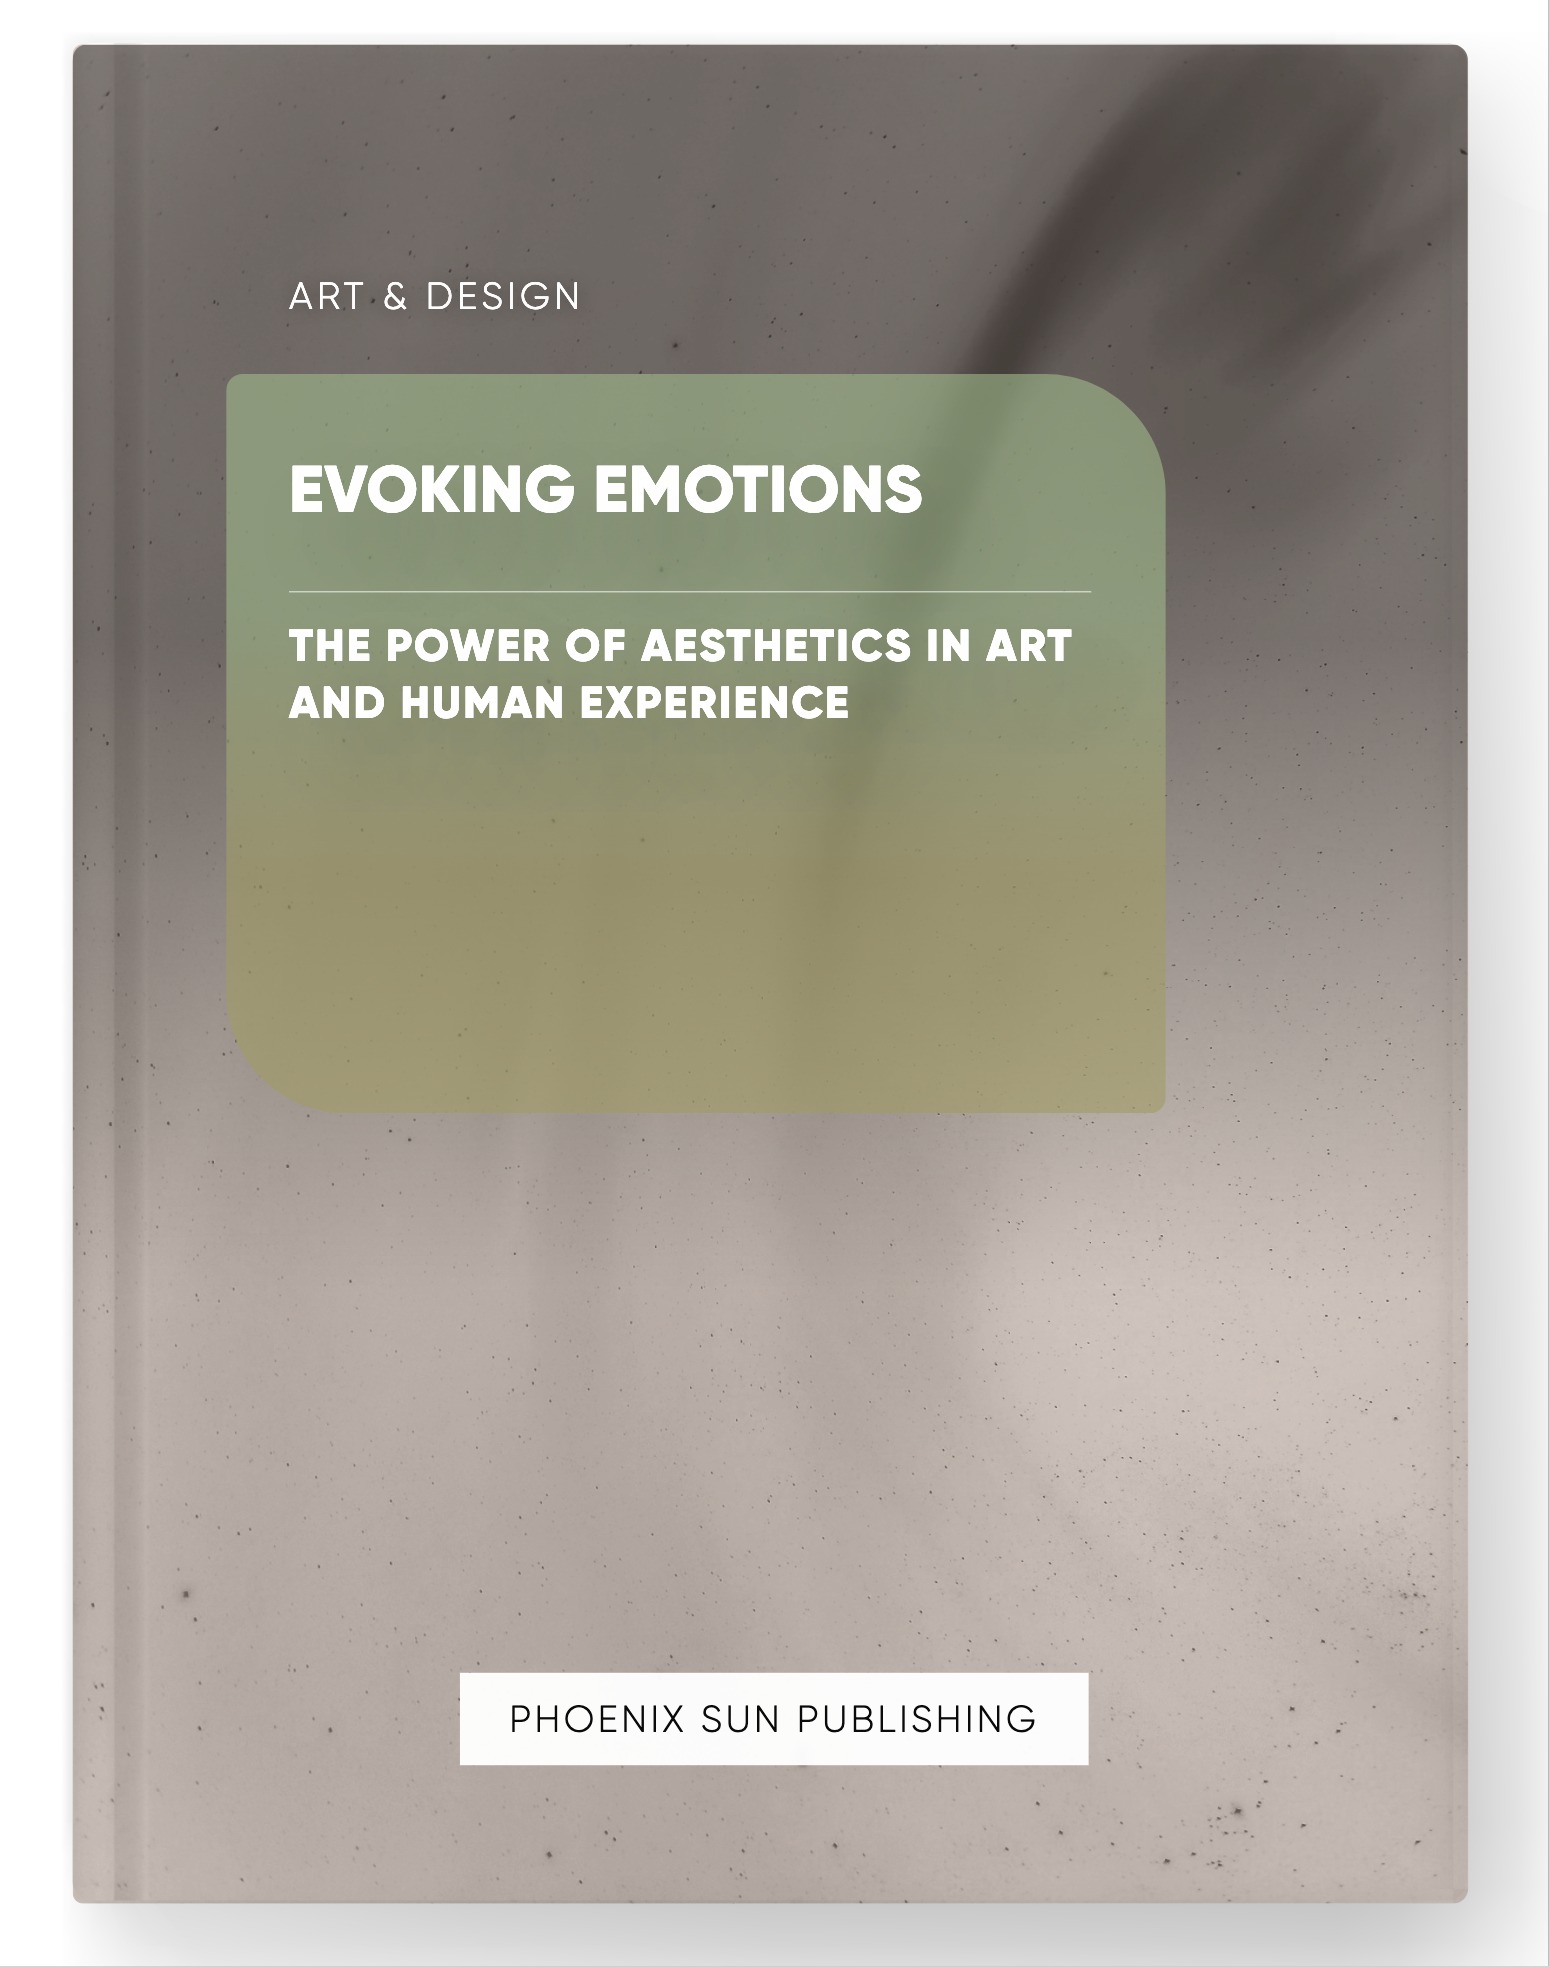 Evoking Emotions – The Power of Aesthetics in Art and Human Experience